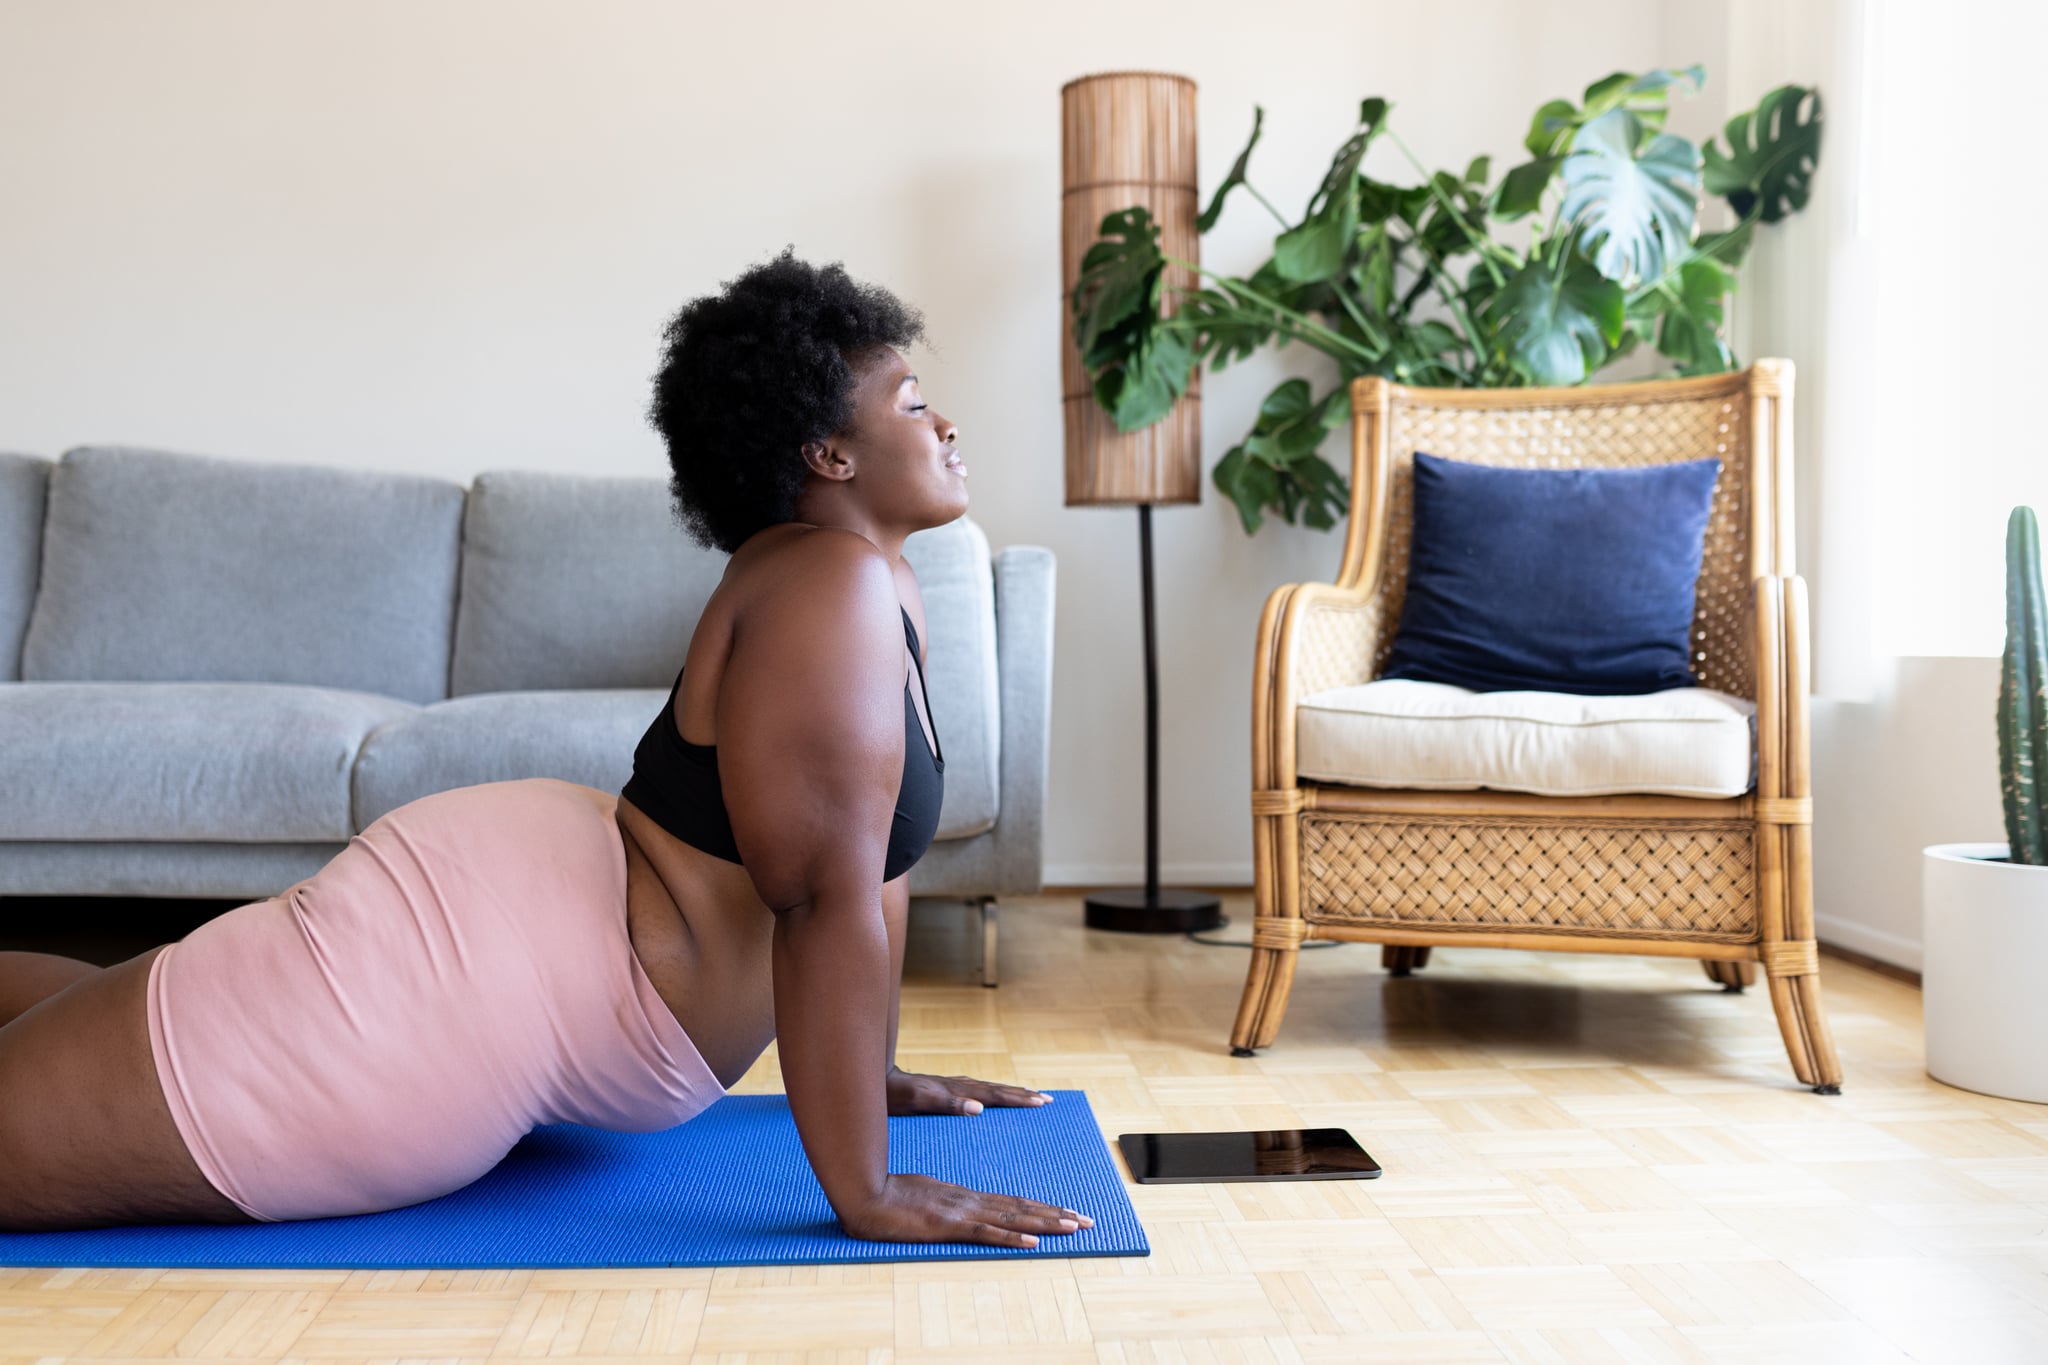 <p>The keyword here is <em>active</em>. "Aim for 10,000 steps during the day and do some stretching or take a chilled-out class like yoga or barre," Roser says. These routines will help your body recover: </p> <ul> <li><a href="https://www.popsugar.com/fitness/10-minute-walking-workout-pride-month-49190289" class="ga-track">10-Minute Walking Workout</a></li> <li><a href="https://www.popsugar.com/fitness/30-minute-energy-boosting-morning-yoga-flow-49311859" class="ga-track">30-Minute Energizing Yoga Flow</a></li> </ul>